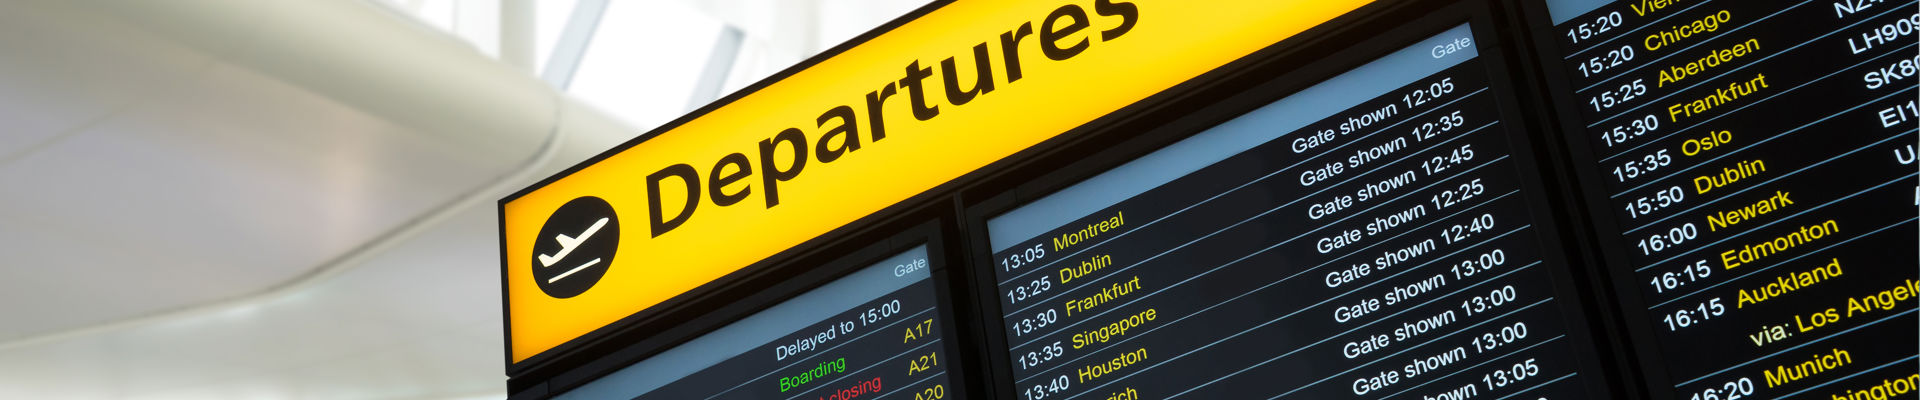 From Legacy Systems to Innovation: IT Services Tailored for Airports